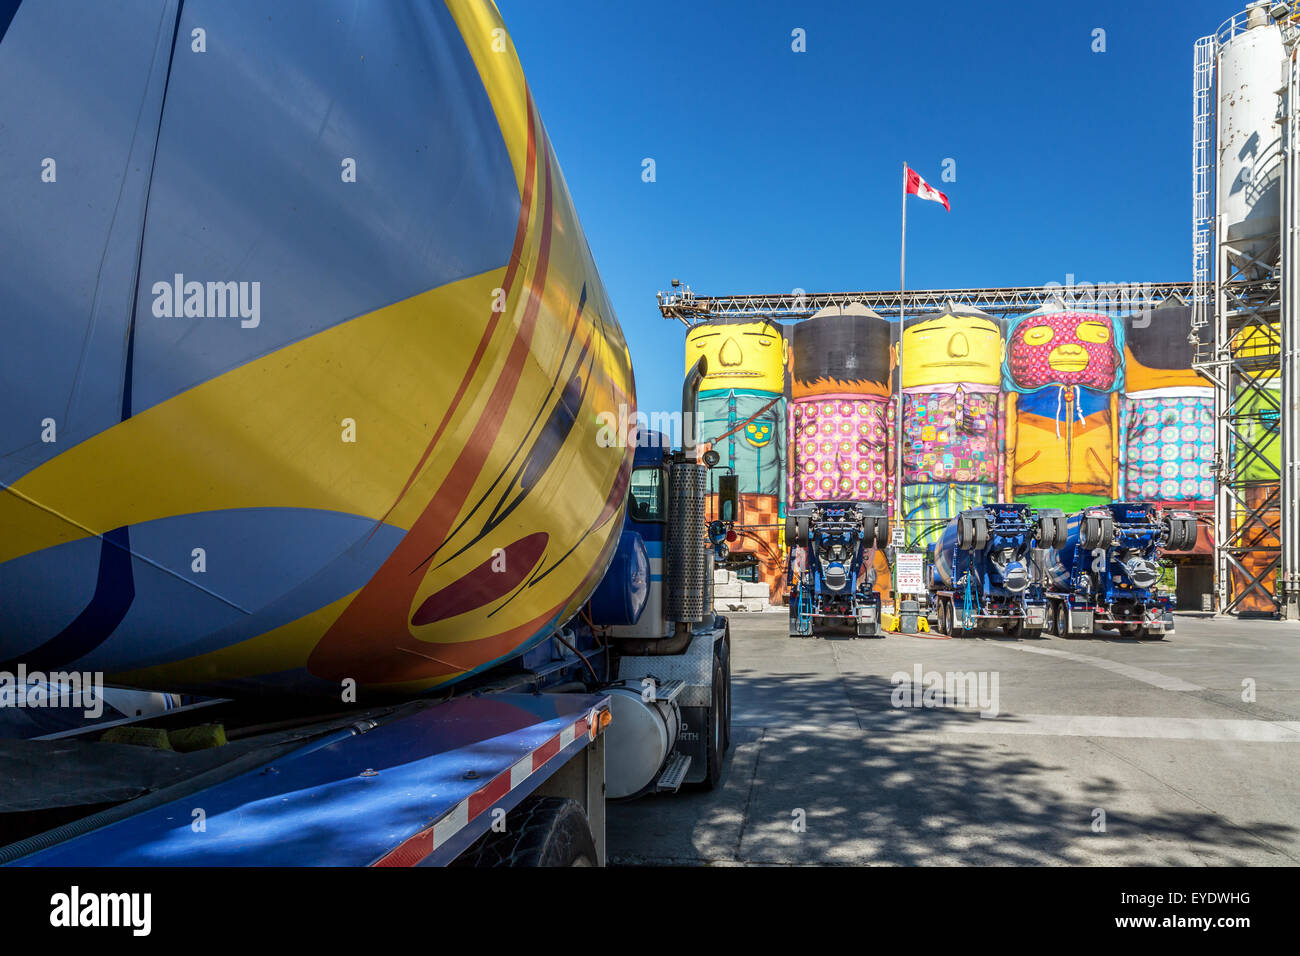 Ocean Concrete silos painted by Os Gemeos, Granville Island, Vancouver, British Columbia, Canada Stock Photo